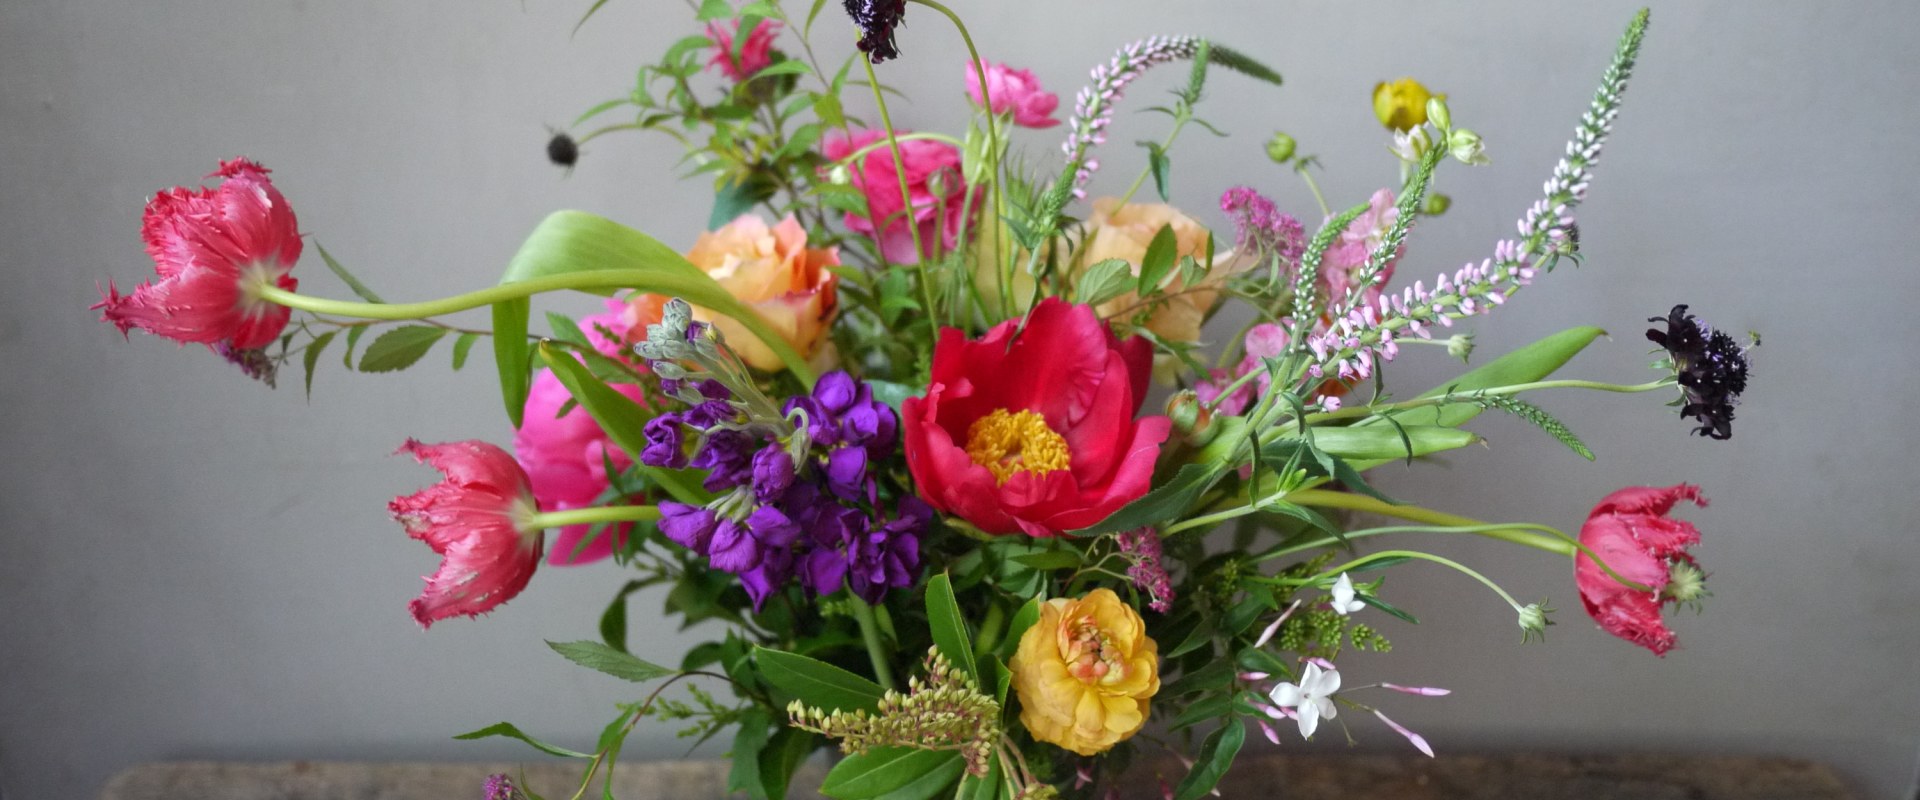 Discounts and Special Offers for National Organizations at Oklahoma City Florists